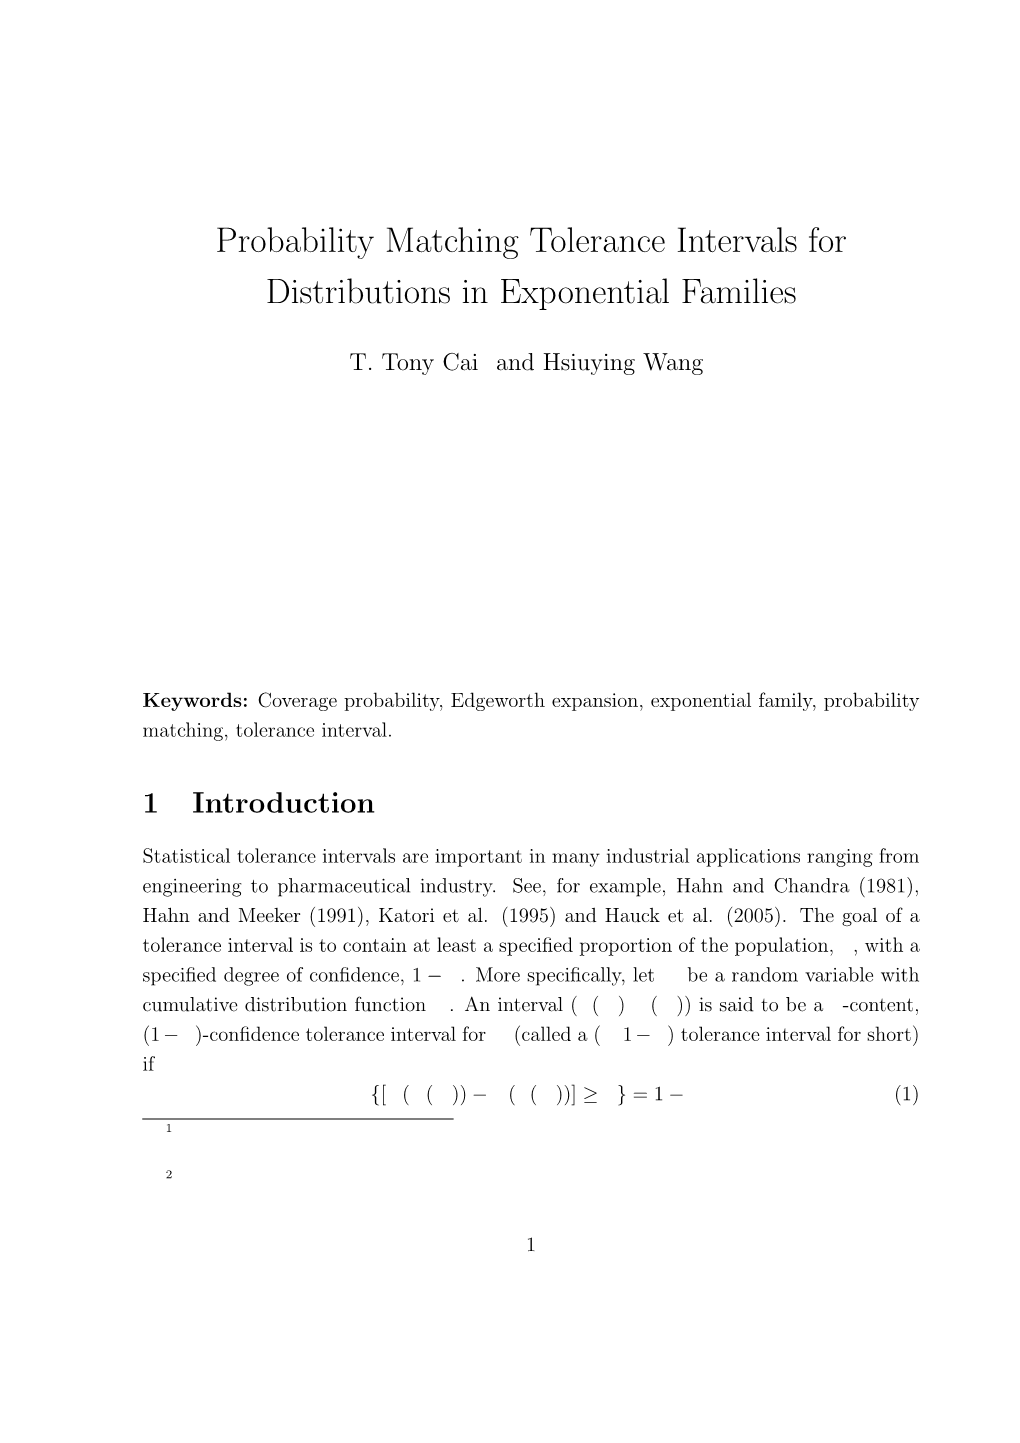 Probability Matching Tolerance Intervals for Distributions in Exponential Families